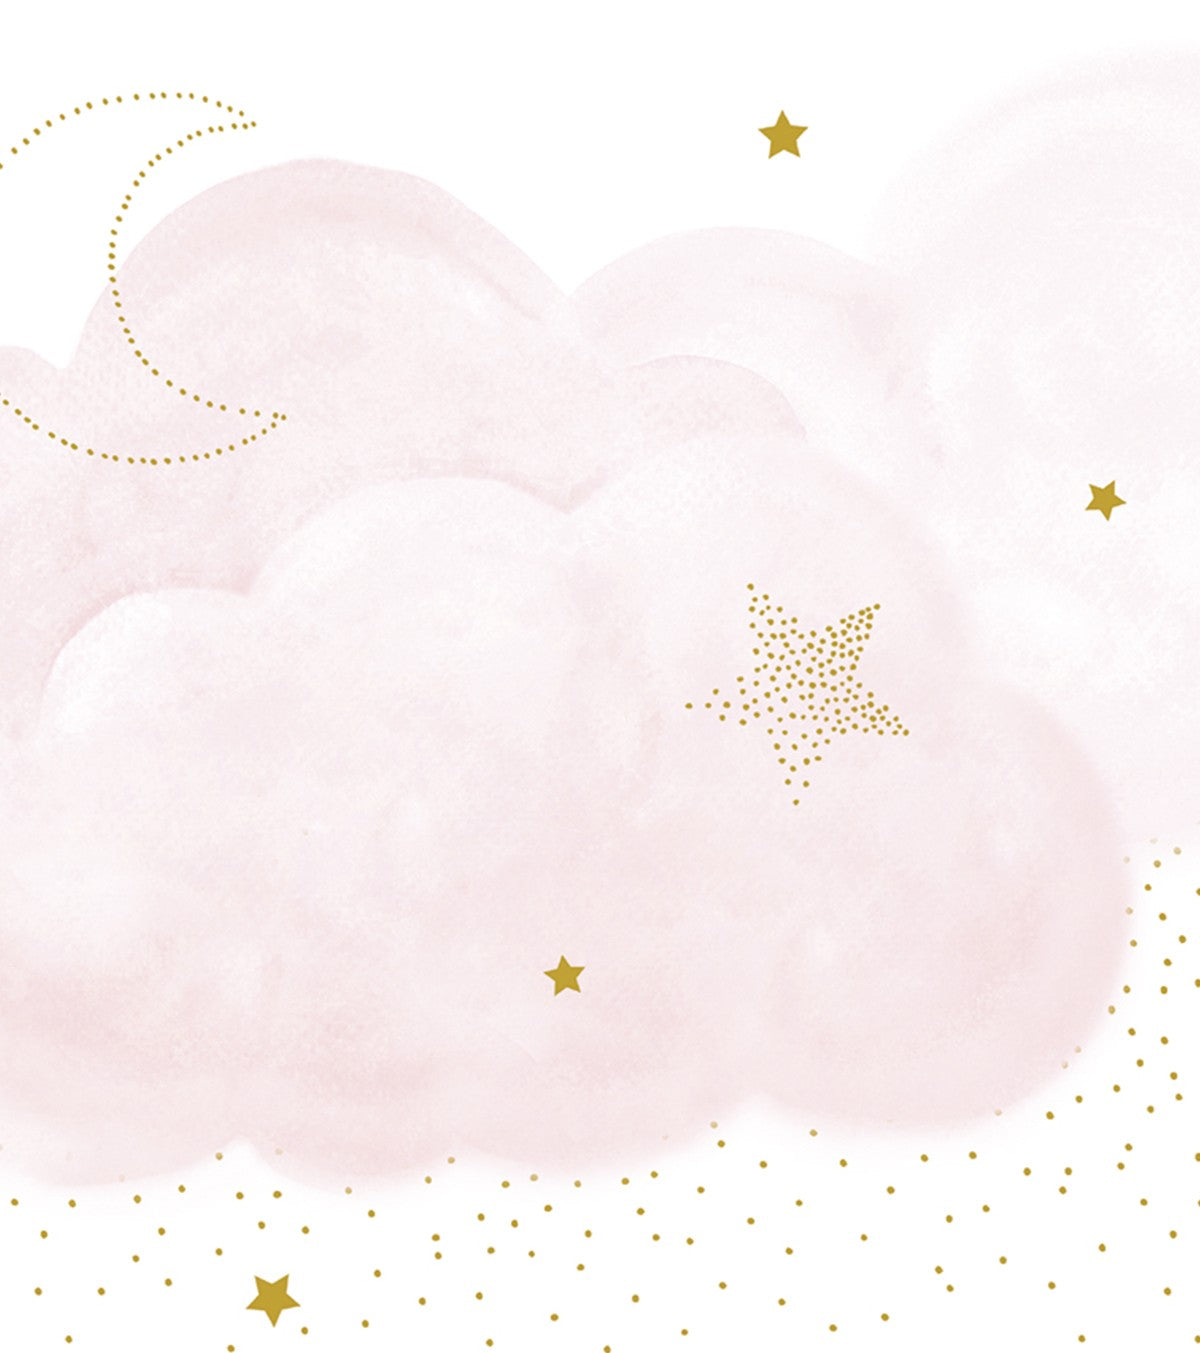 Stardust - Children's Poster - Stars And Clouds